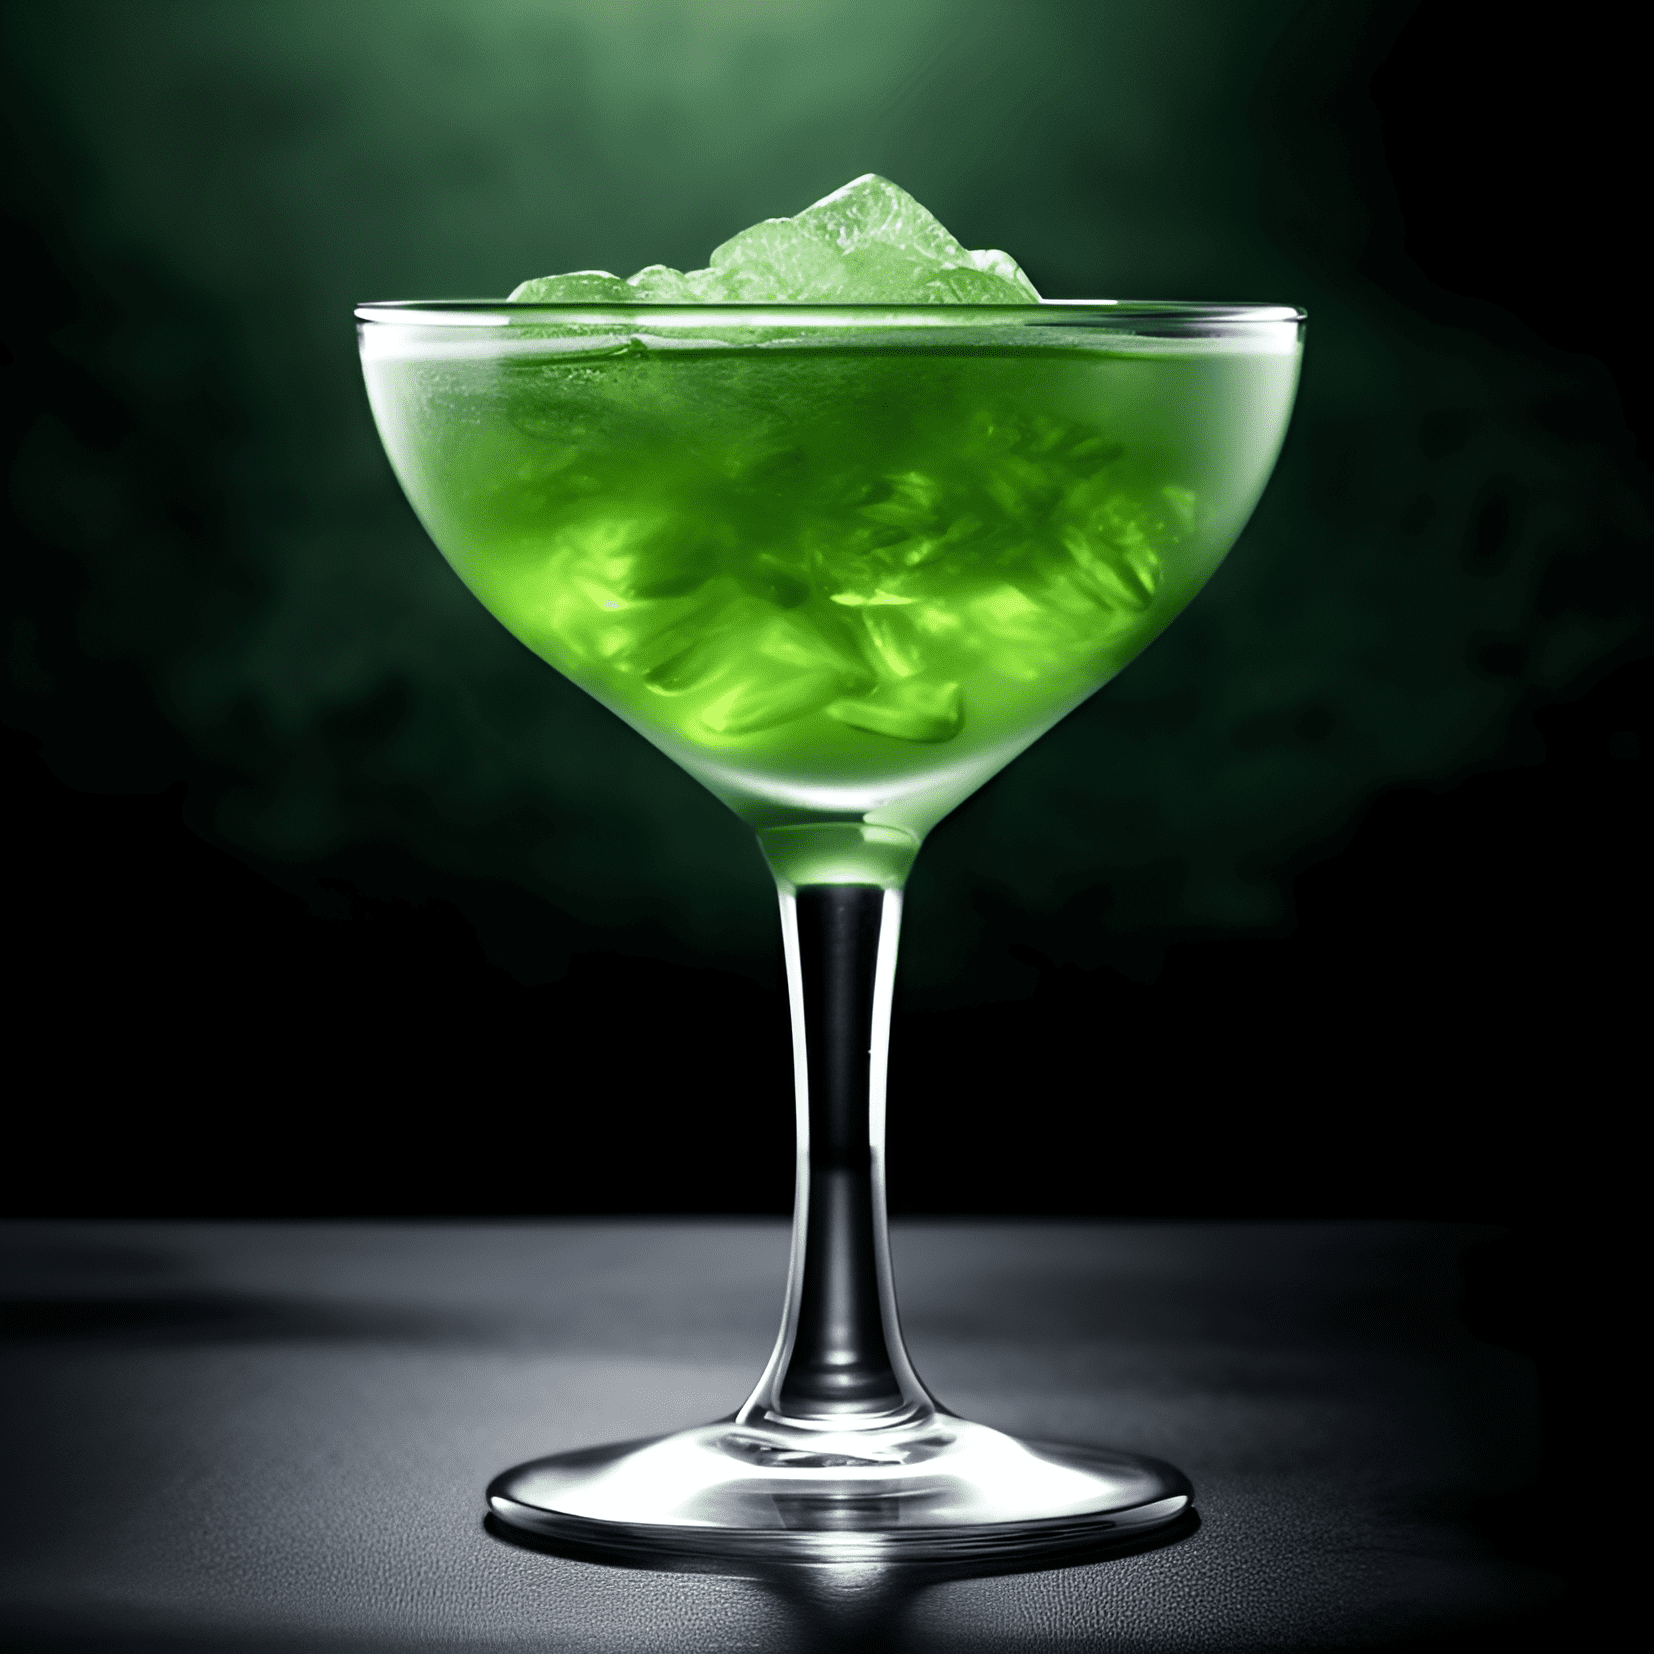 Green Ghost Cocktail Recipe - The Green Ghost cocktail is a complex and refreshing drink with a mix of herbal, citrus, and slightly sweet flavors. The gin provides a strong, juniper-forward base, while the green Chartreuse adds a unique herbal and slightly sweet quality. The lime juice brings a fresh, tart citrus note that balances out the sweetness and adds a zesty finish.